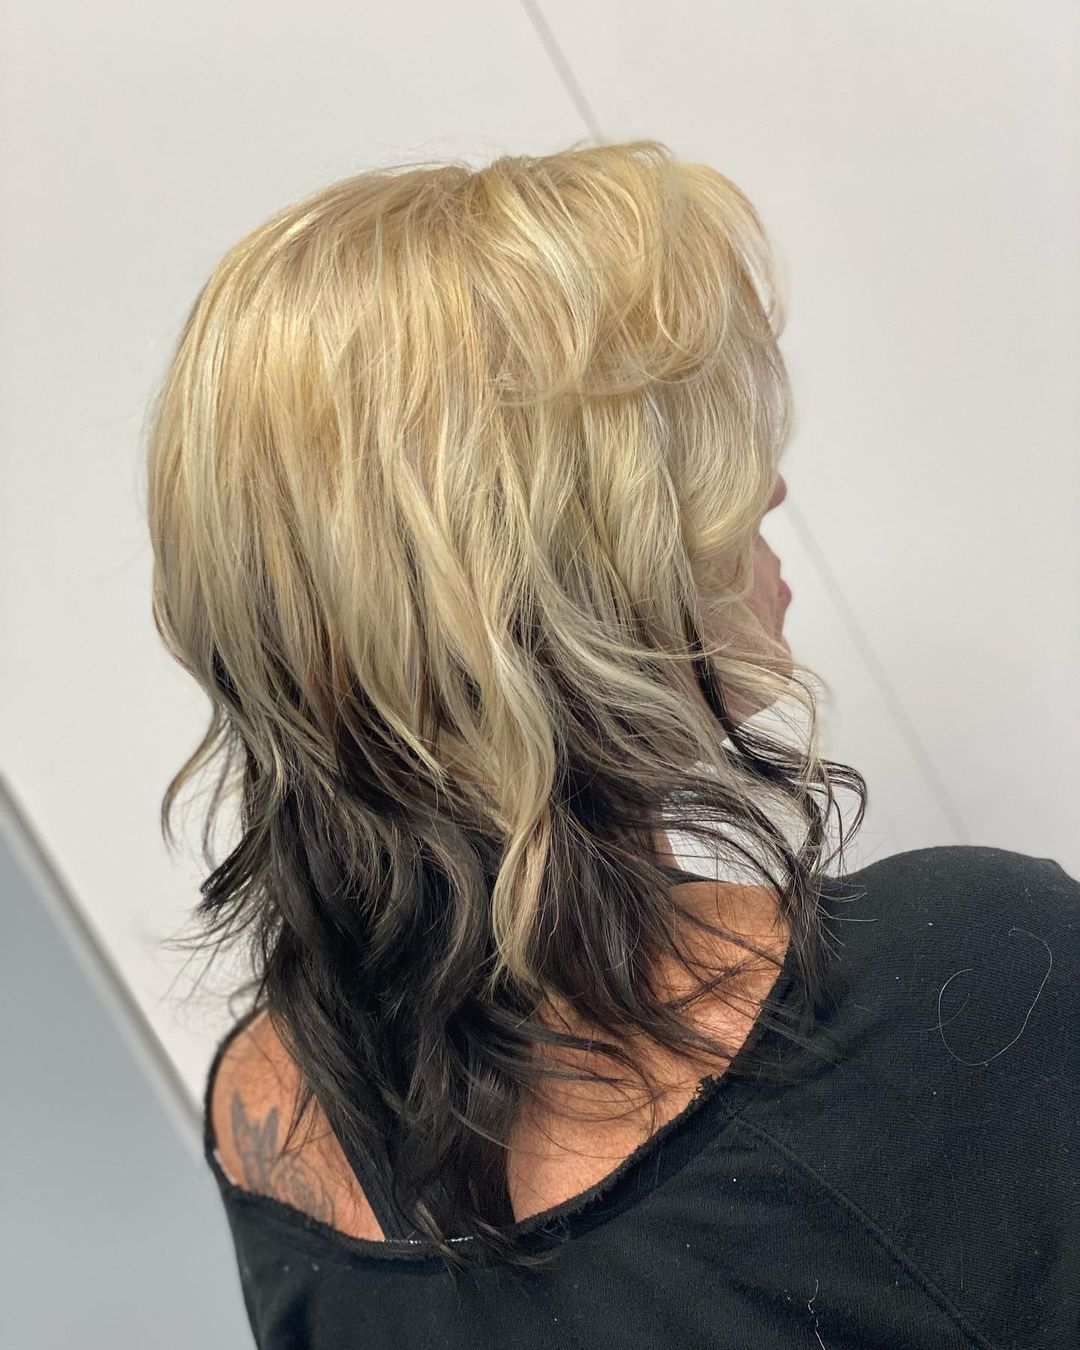 cottrell smith add black and blonde underneath hair photo